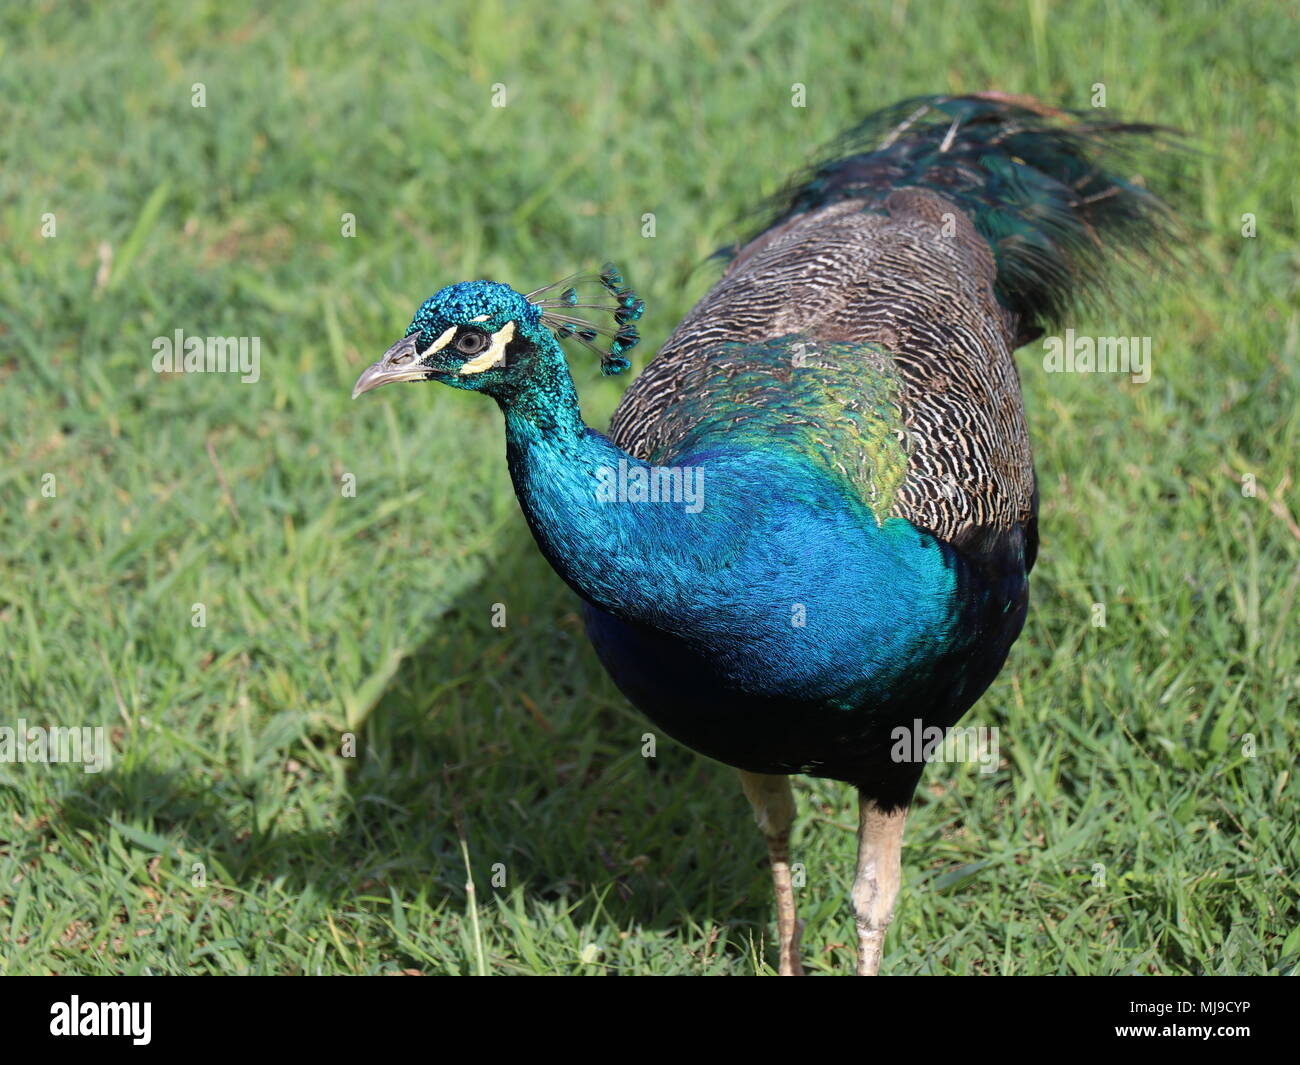 Peacock with his beautiful colors. Stock Photo